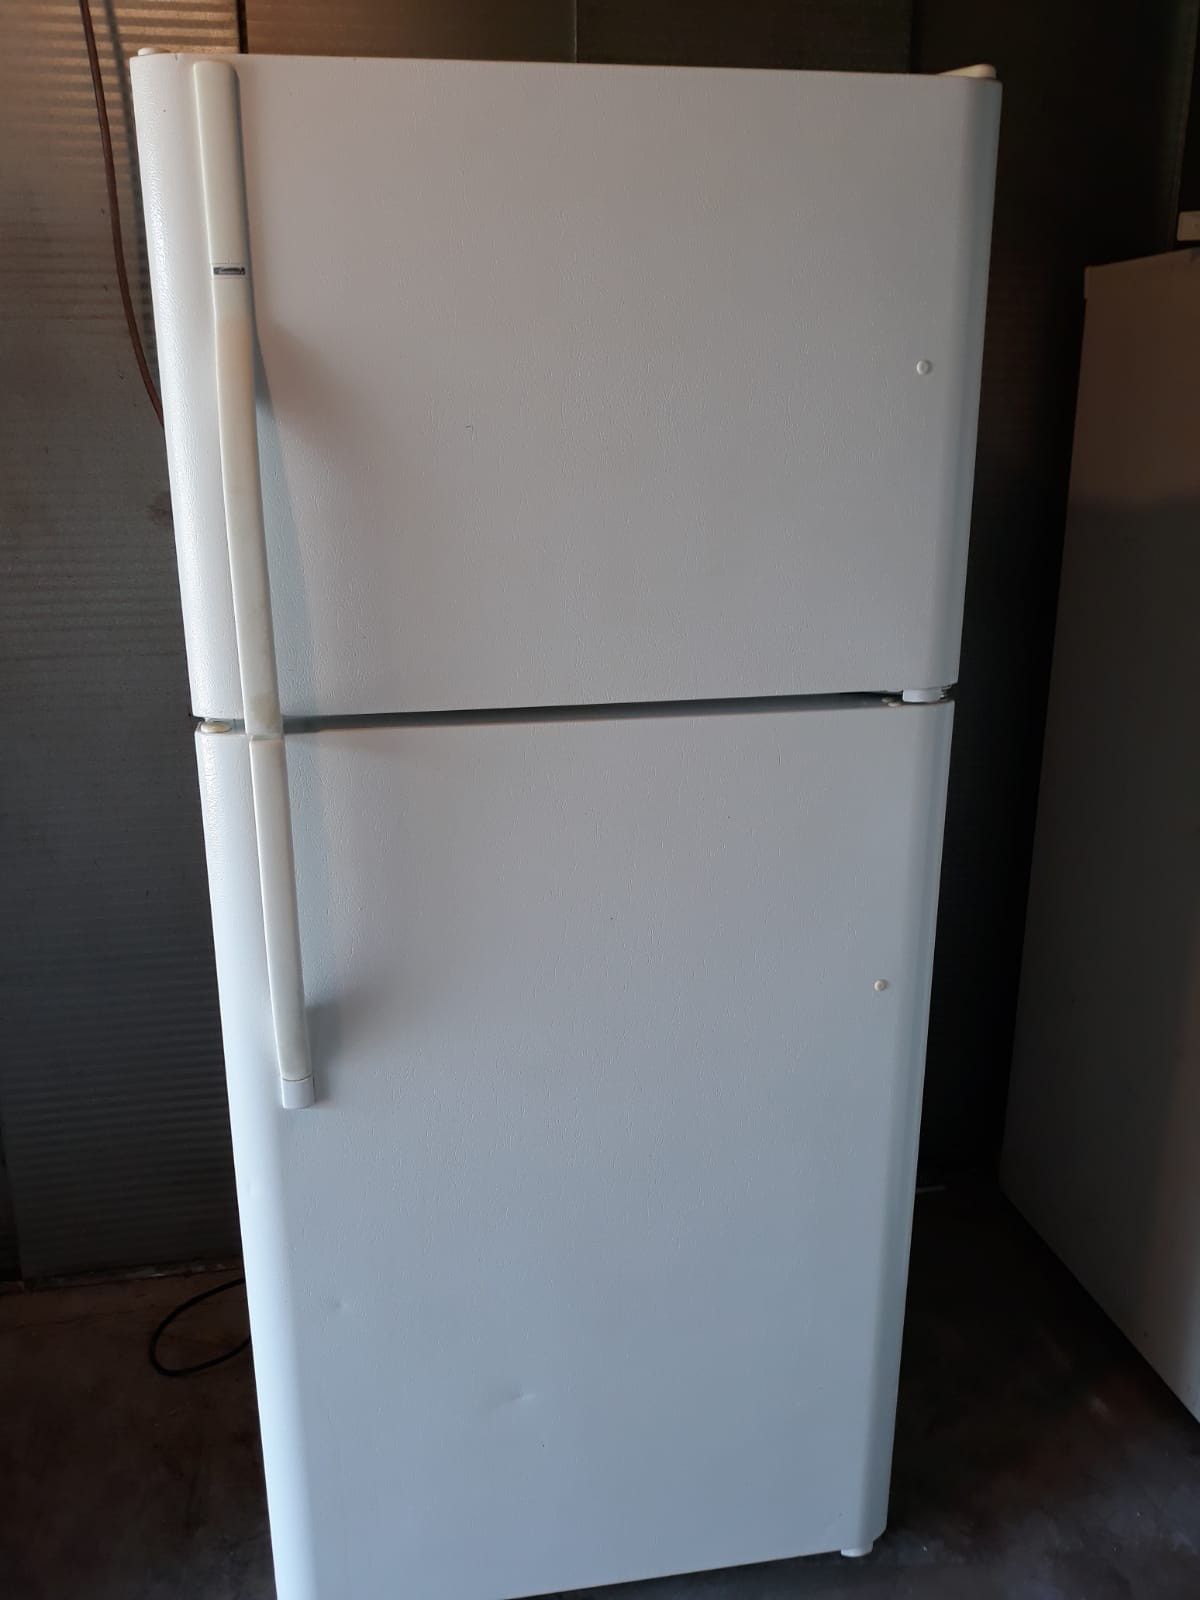 '=Kenmore Apartment Size Refrigerator ( (size: 30w by 30" d by 69"can deliver and install for free:_:;;